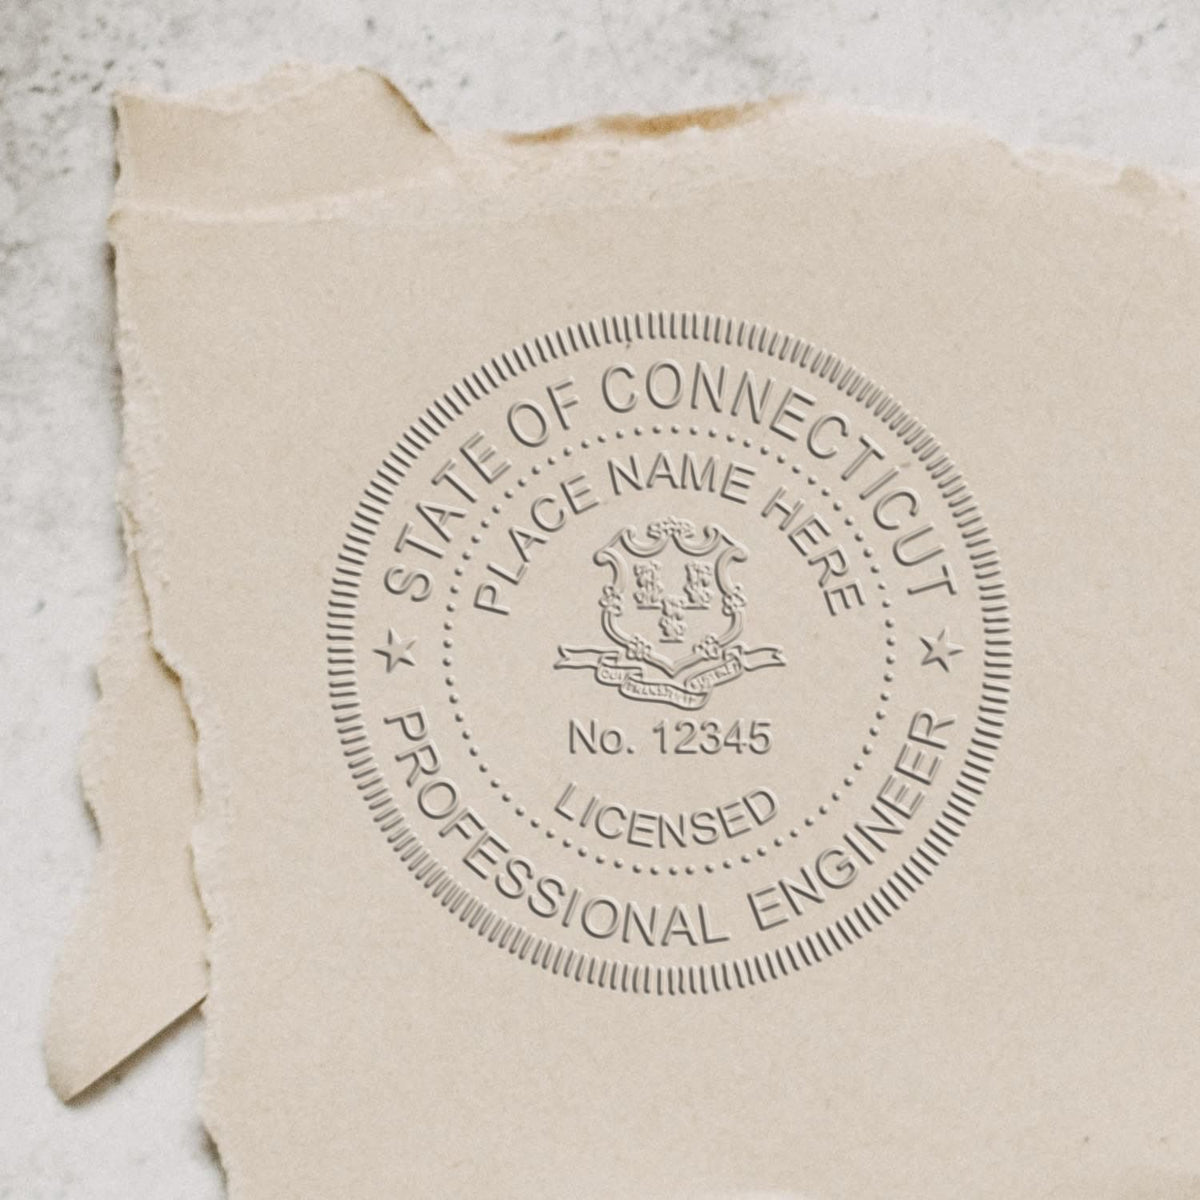 A photograph of the Connecticut Engineer Desk Seal stamp impression reveals a vivid, professional image of the on paper.